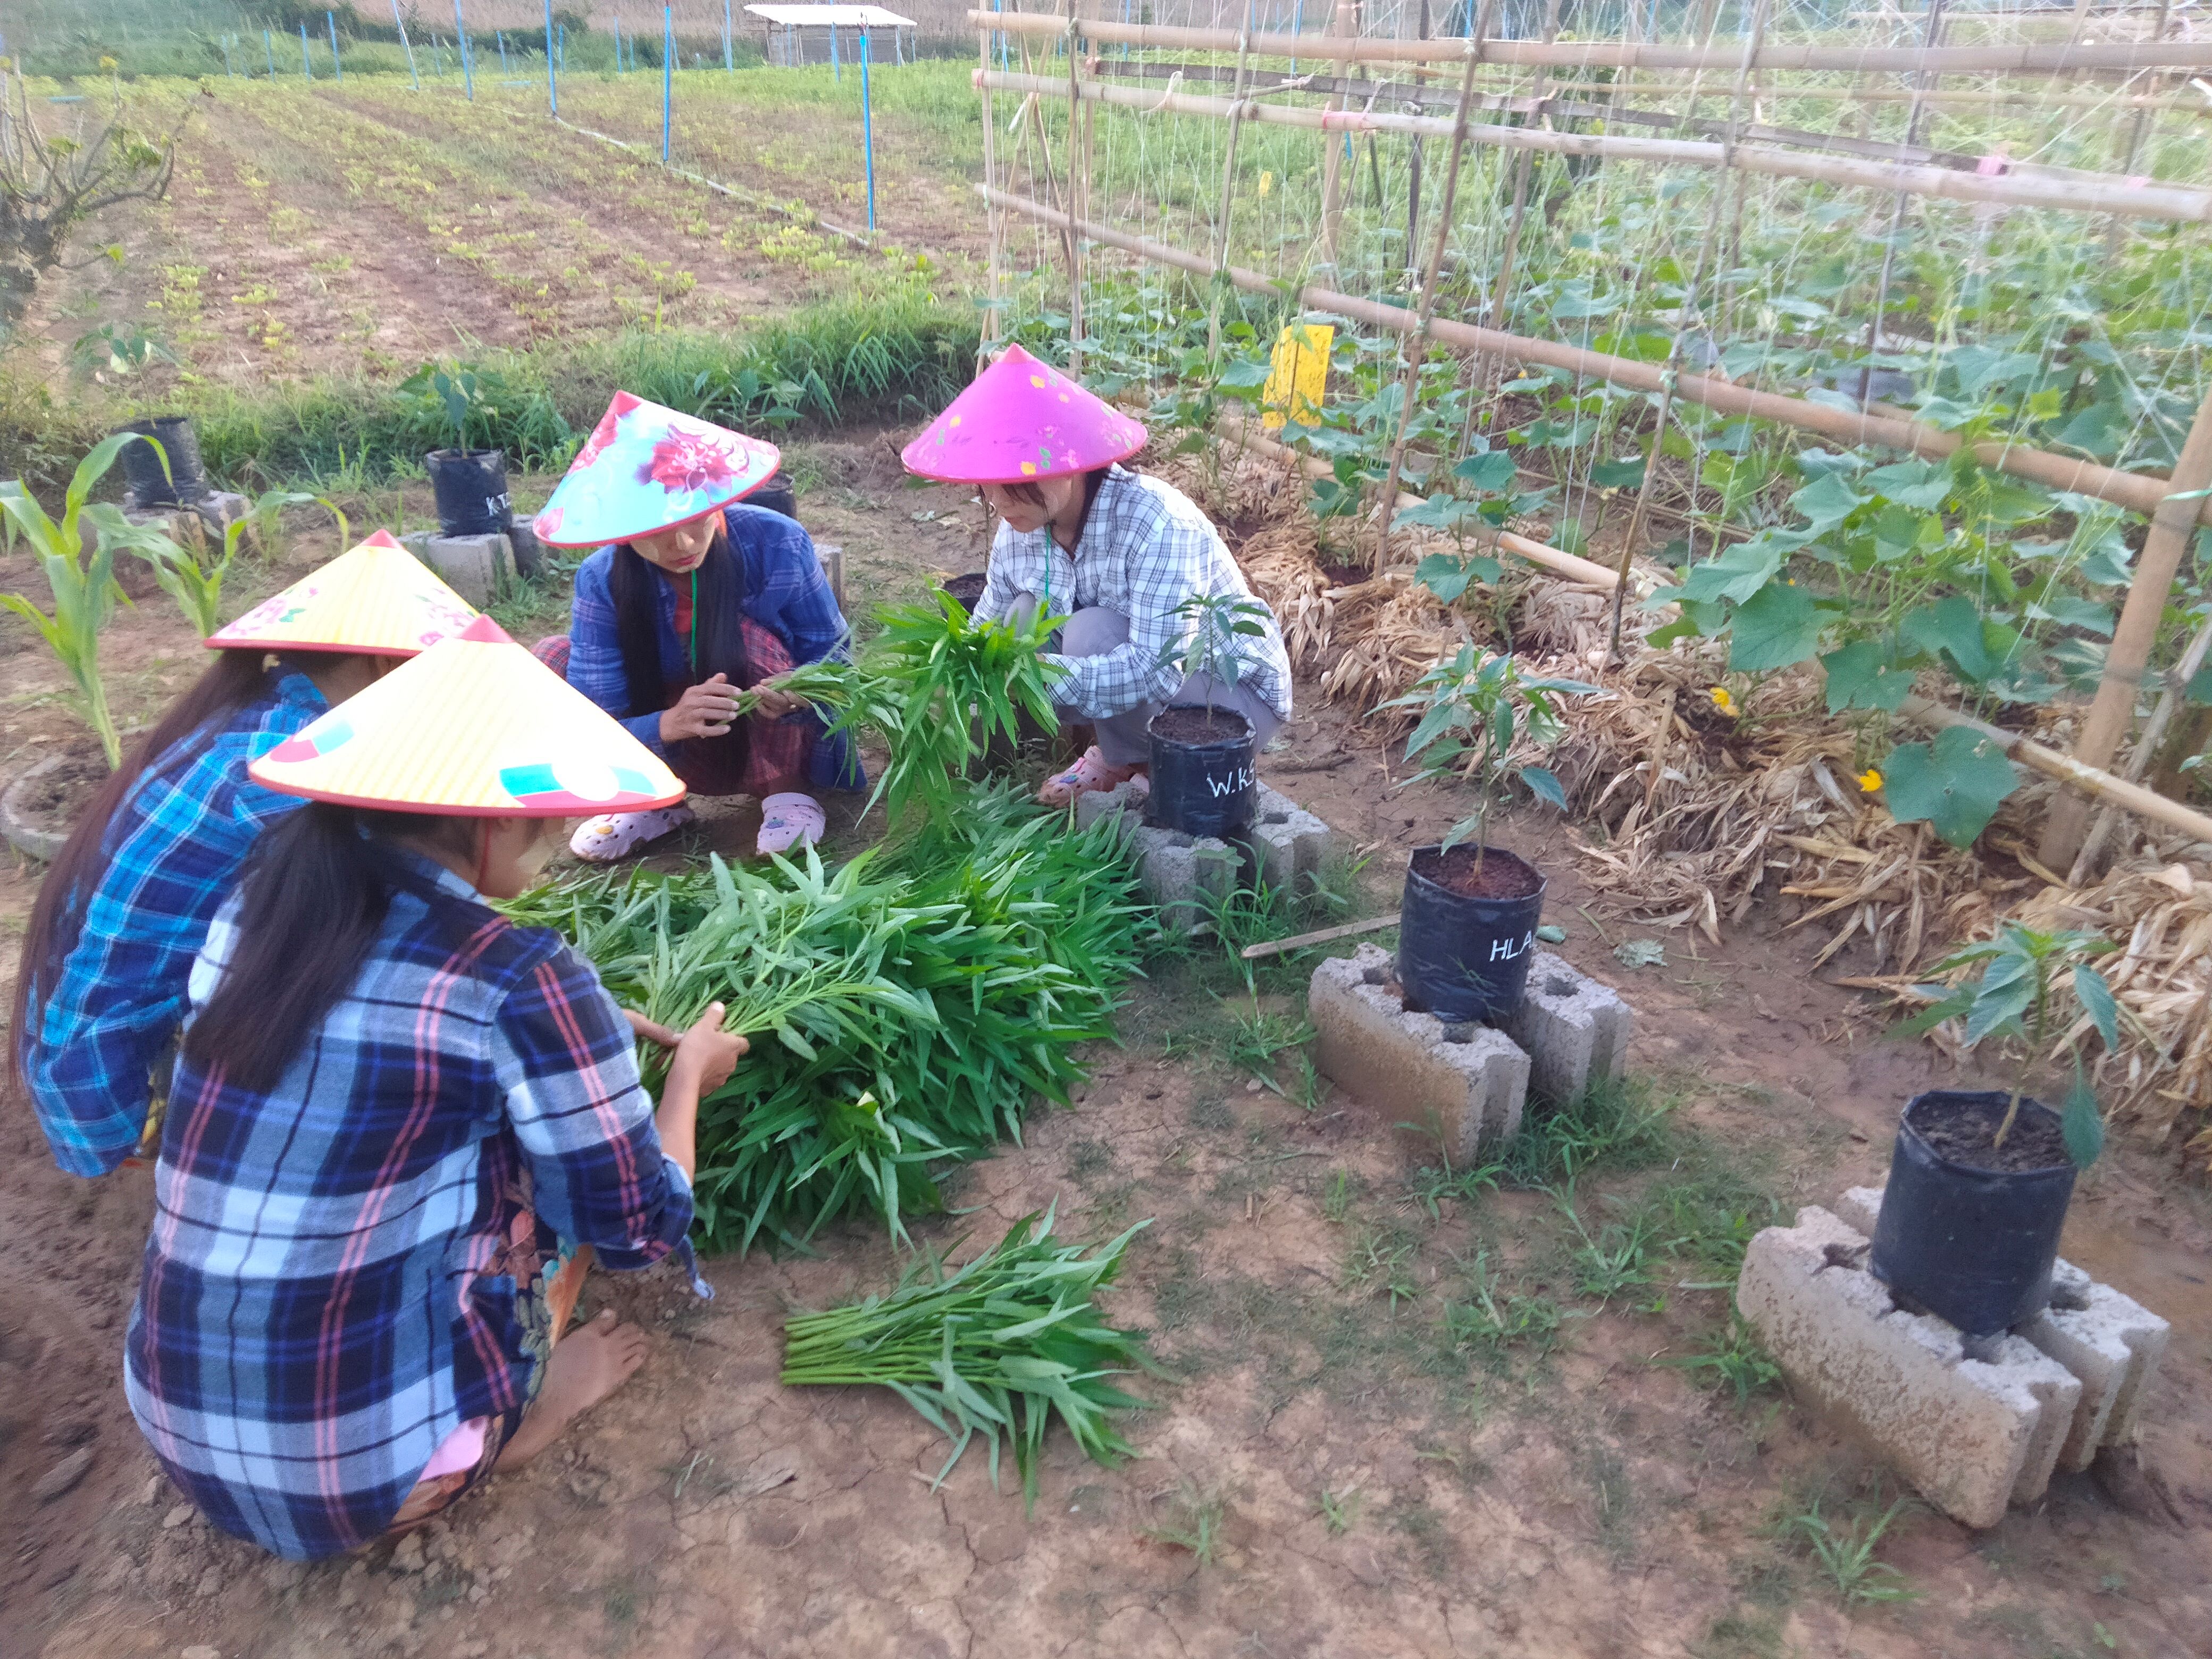 Women sit in a semicircle while working with a pile of green stalks with leaves.